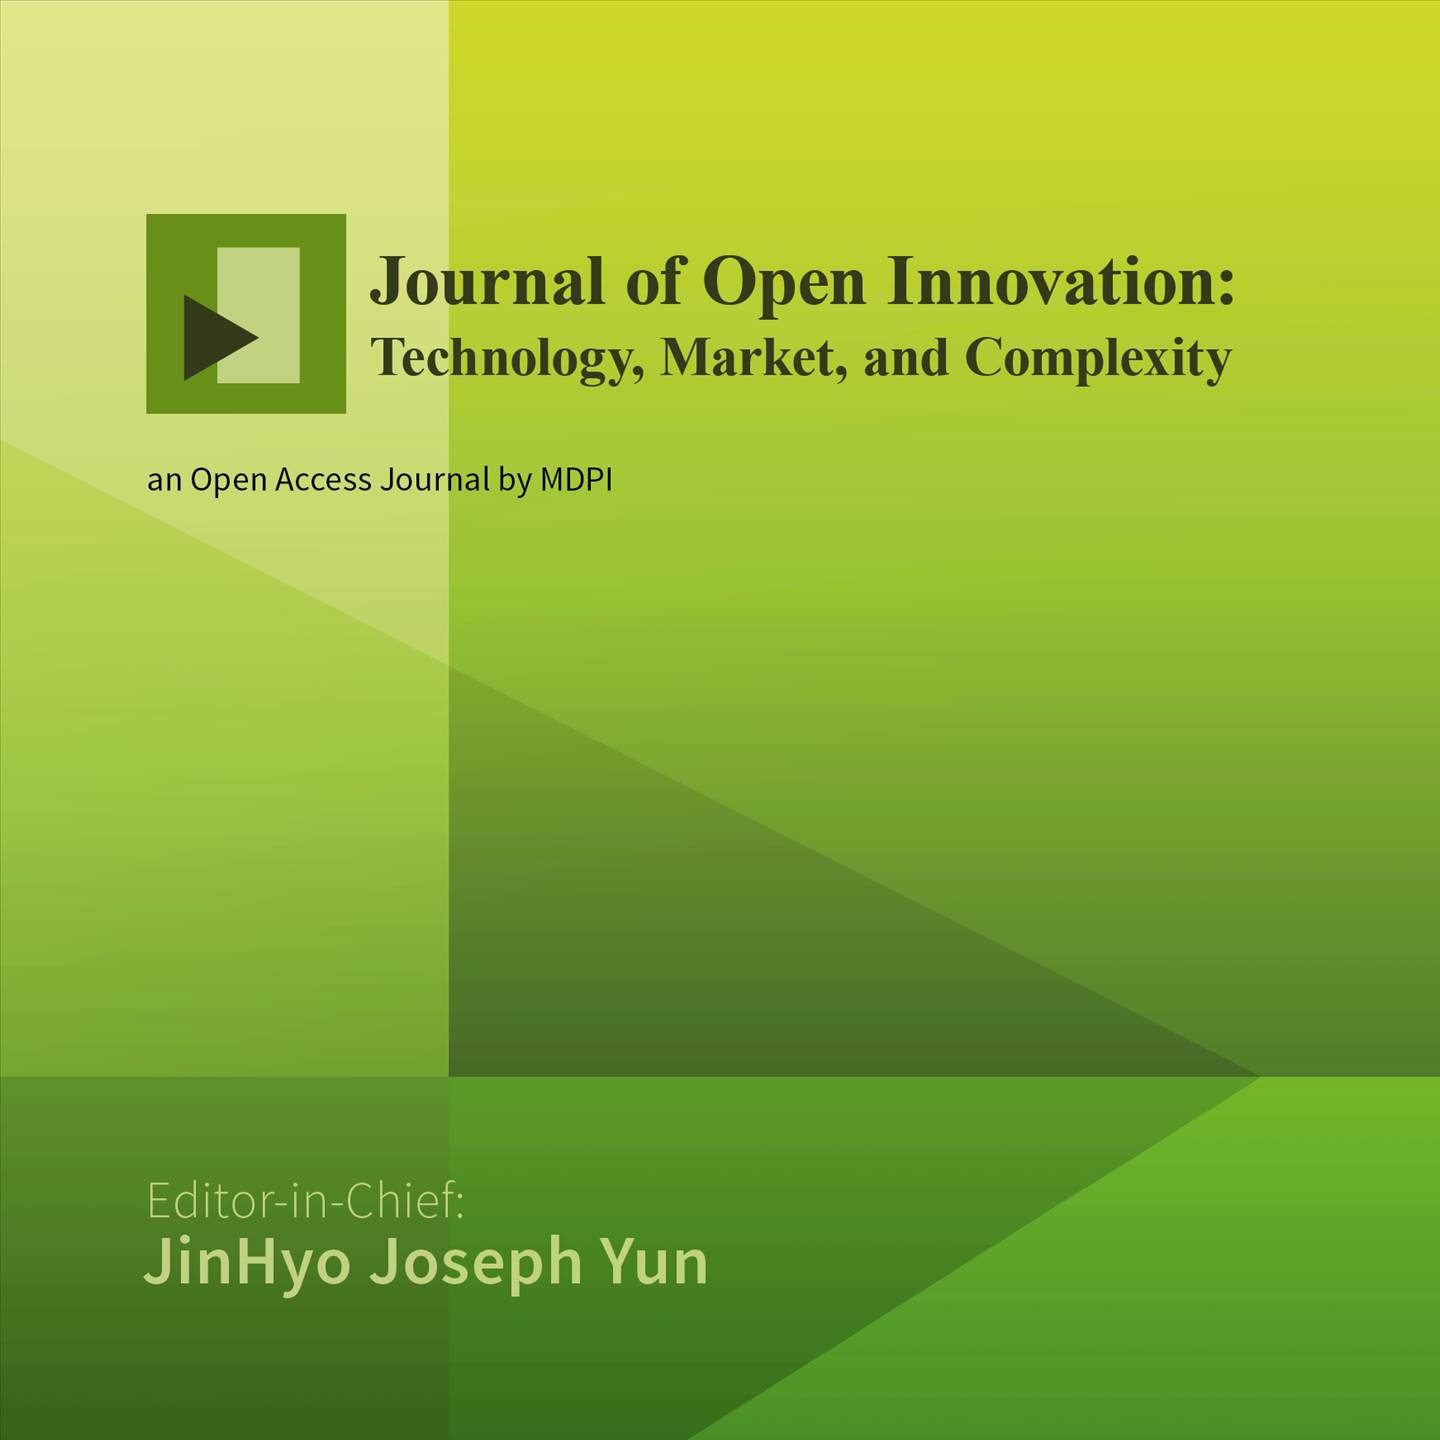 The Impact Of Organizational Capabilities On The International Performance Of Knowledge-Based Firms